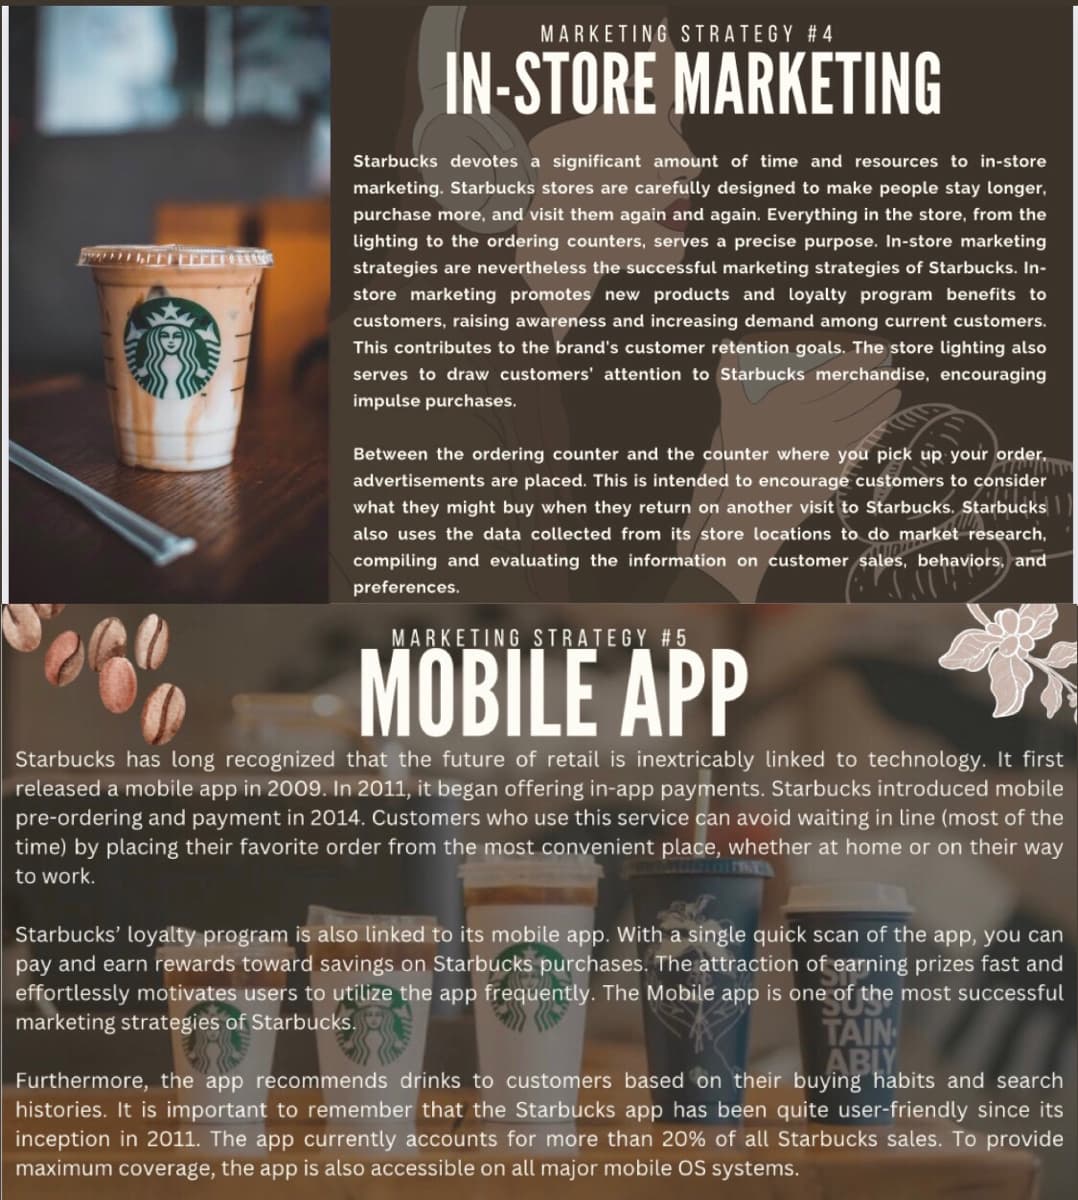 FFFFFORMAS
MARKETING STRATEGY #4
IN-STORE MARKETING
Starbucks devotes a significant amount of time and resources to in-store
marketing. Starbucks stores are carefully designed to make people stay longer,
purchase more, and visit them again and again. Everything in the store, from the
lighting to the ordering counters, serves a precise purpose. In-store marketing
strategies are nevertheless the successful marketing strategies of Starbucks. In-
store marketing promotes new products and loyalty program benefits to
customers, raising awareness and increasing demand among current customers.
This contributes to the brand's customer retention goals. The store lighting also
serves to draw customers' attention to Starbucks merchandise, encouraging
impulse purchases.
Between the ordering counter and the counter where you pick up your order.
WWW
advertisements are placed. This is intended to encourage customers to consider
what they might buy when they return on another visit to Starbucks. Starbucks
also uses the data collected from its store locations to do market research,
compiling and evaluating the information on customer sales, behaviors, and
preferences.
MARKETING STRATEGY #5
MOBILE APP
Starbucks has long recognized that the future of retail is inextricably linked to technology. It first
released a mobile app in 2009. In 2011, it began offering in-app payments. Starbucks introduced mobile
pre-ordering and payment in 2014. Customers who use this service can avoid waiting in line (most of the
time) by placing their favorite order from the most convenient place, whether at home or on their way
to work.
Starbucks' loyalty program is also linked to its mobile app. With a single quick scan of the app, you can
pay and earn rewards toward savings on Starbucks purchases. The attraction of earning prizes fast and
effortlessly motivates users to utilize the app frequently. The Mobile app is one of the most successful
marketing strategies of Starbucks.
TAIN
ABLY
Furthermore, the app recommends drinks to customers based on their buying habits and search
histories. It is important to remember that the Starbucks app has been quite user-friendly since its
inception in 2011. The app currently accounts for more than 20% of all Starbucks sales. To provide
maximum coverage, the app is also accessible on all major mobile OS systems.